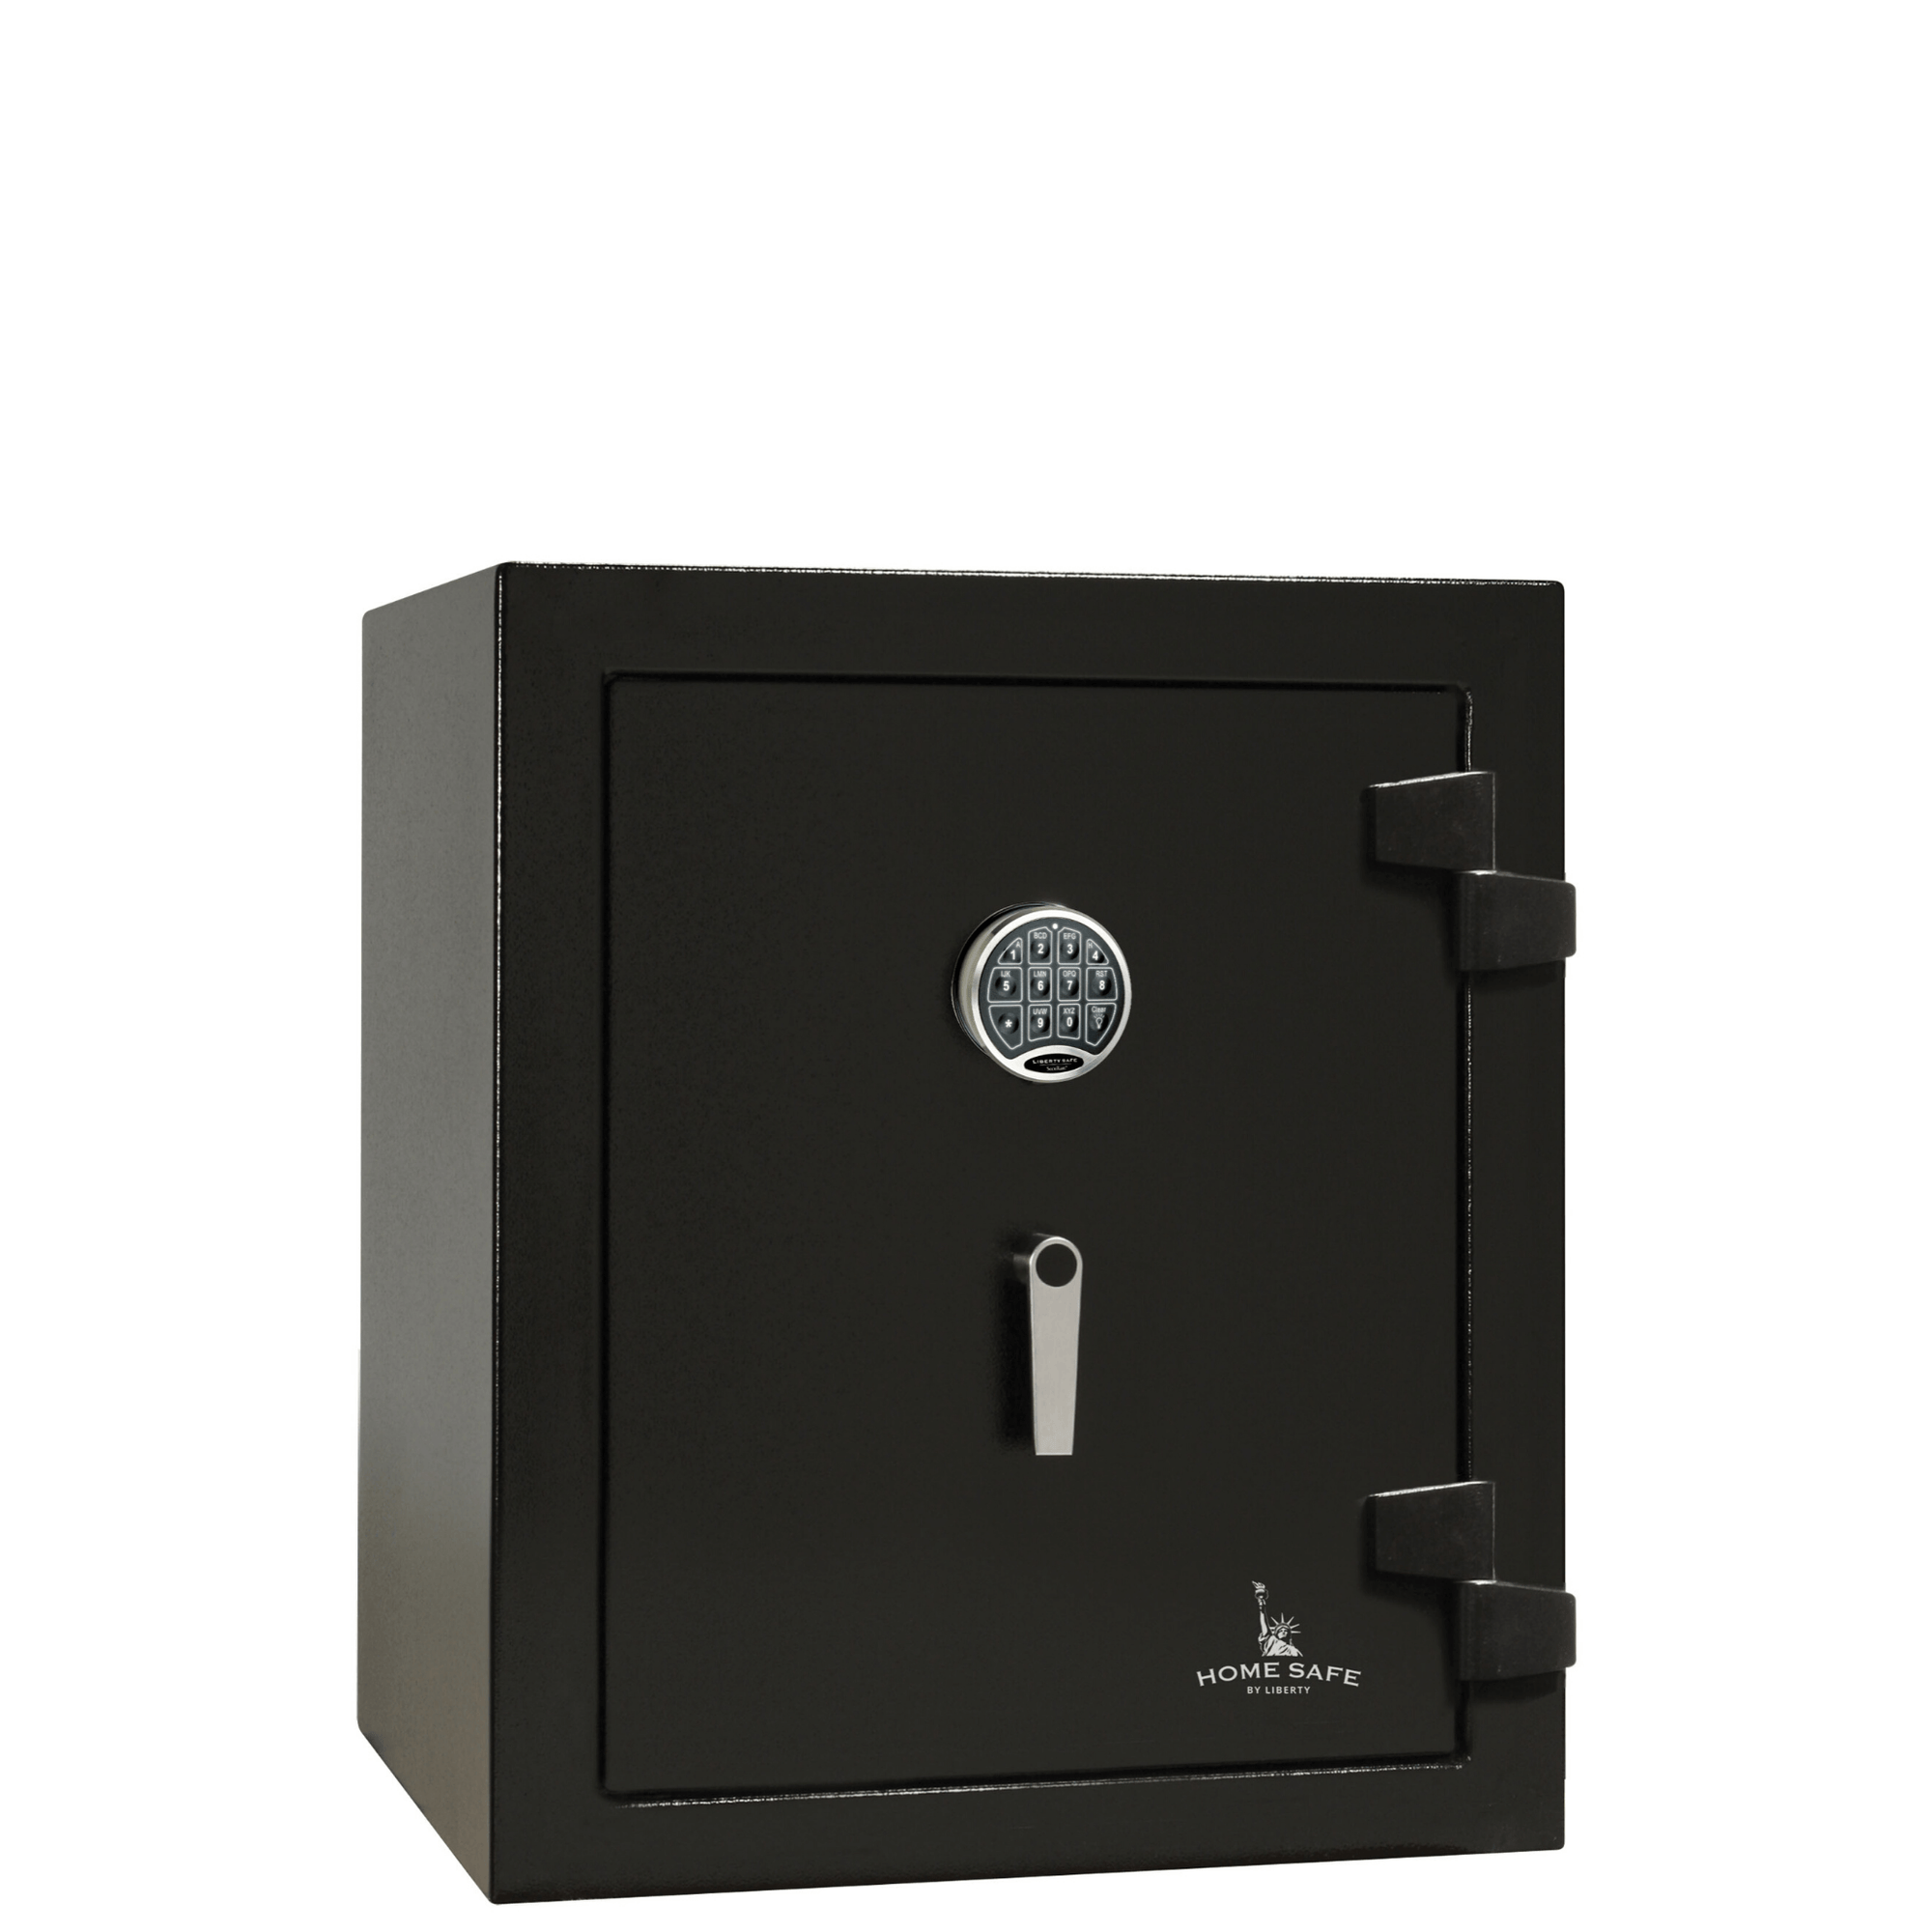 Home Safe Series | 60 Minute Fire Protection | 8 | Dimensions: 30"(H) x 24.25"(W) x 22"(D) | Black Textured | Electronic Lock